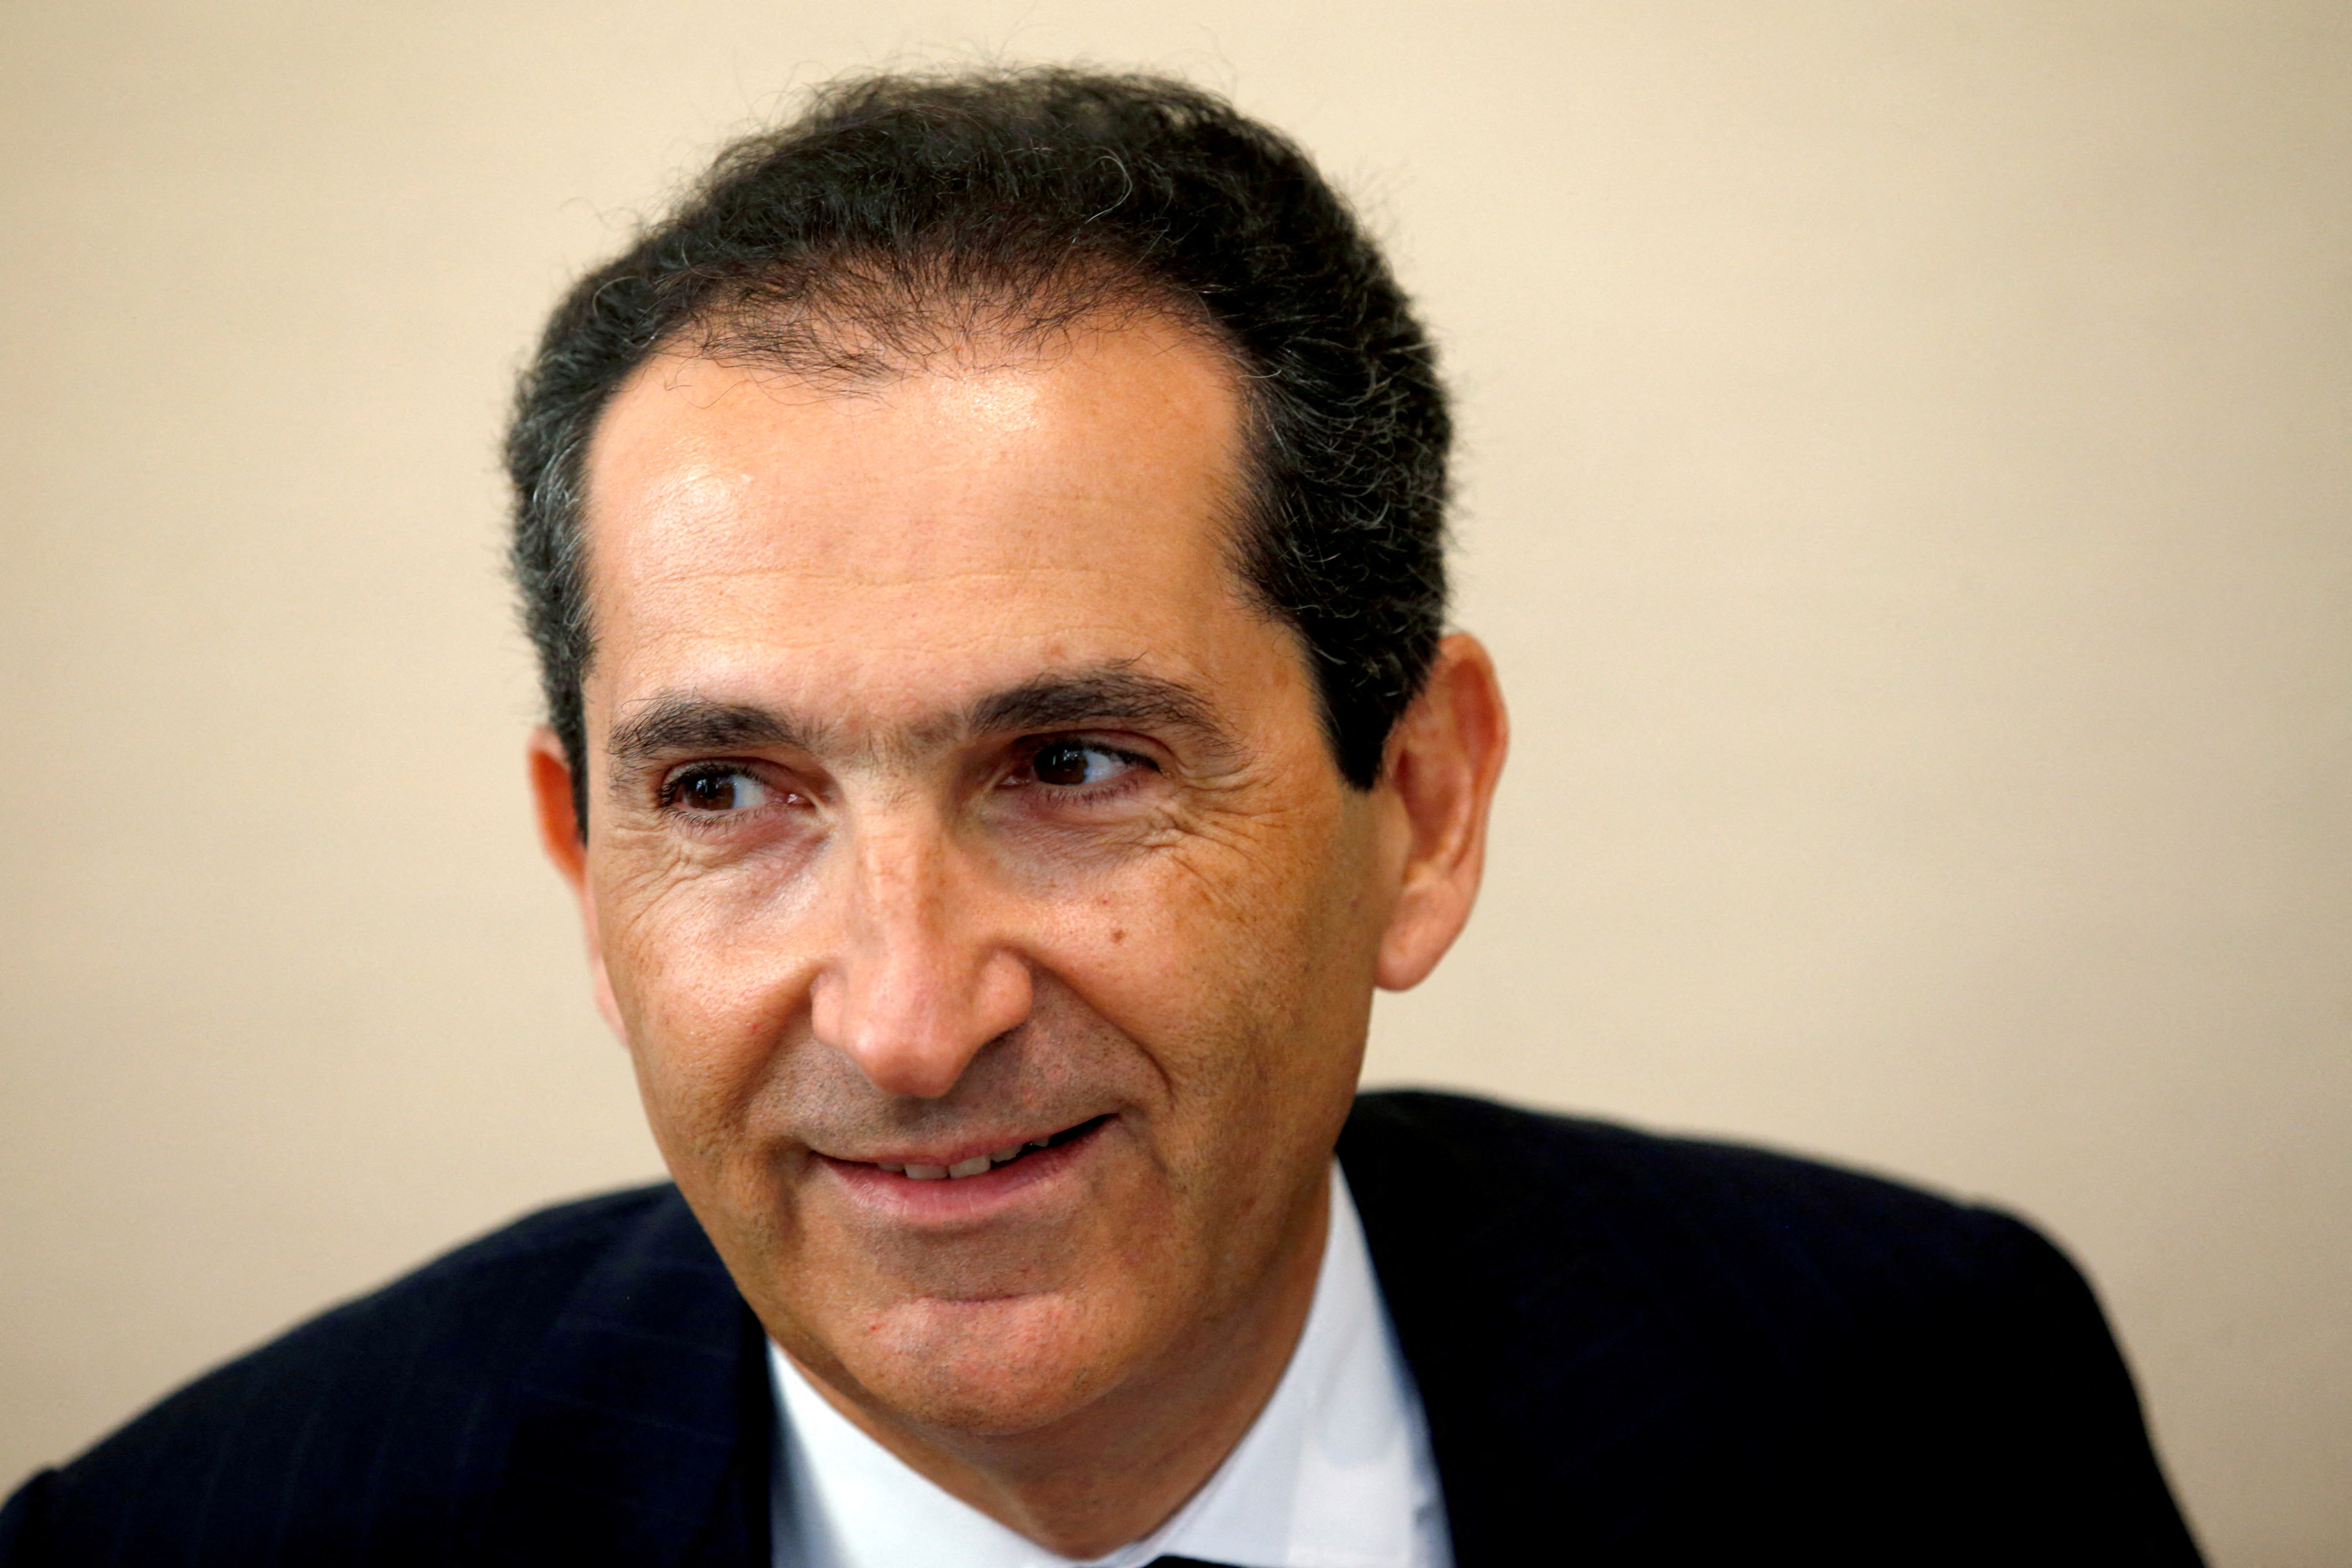 Patrick Drahi: the aggressive dealmaker forced to play the long game at BT